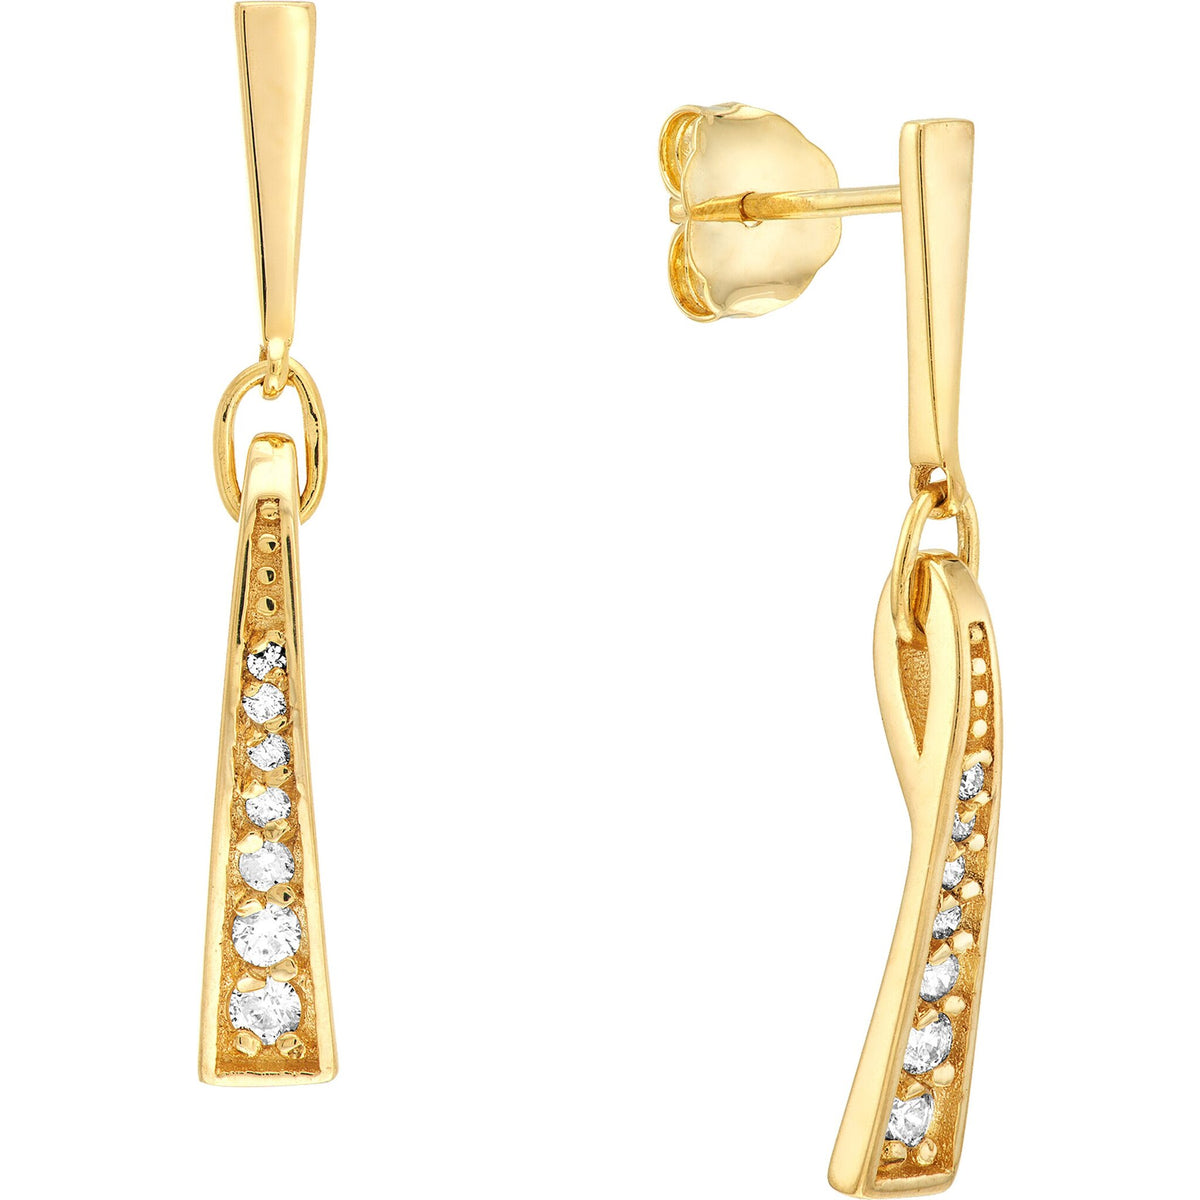 Olas d'Oro Earrings - 14K Yellow Gold Diamond and Polished Tapered Bar Earrings